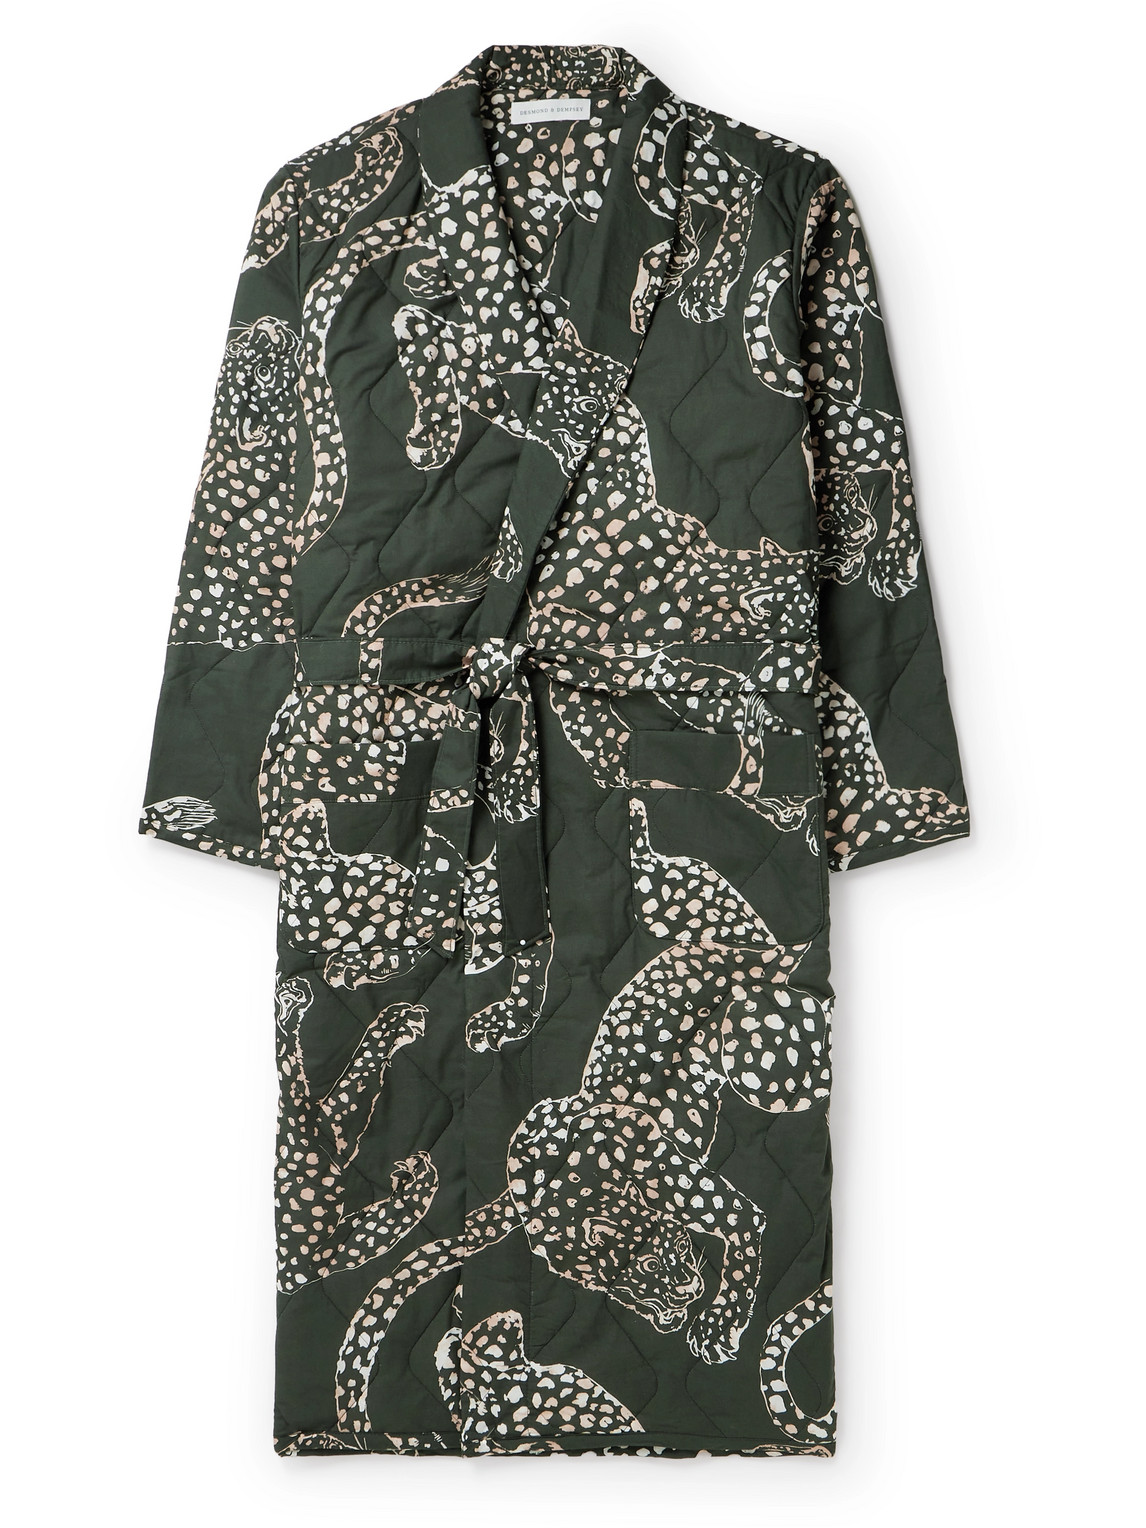 Desmond & Dempsey Quilted Printed Cotton Dressing Gown In Green